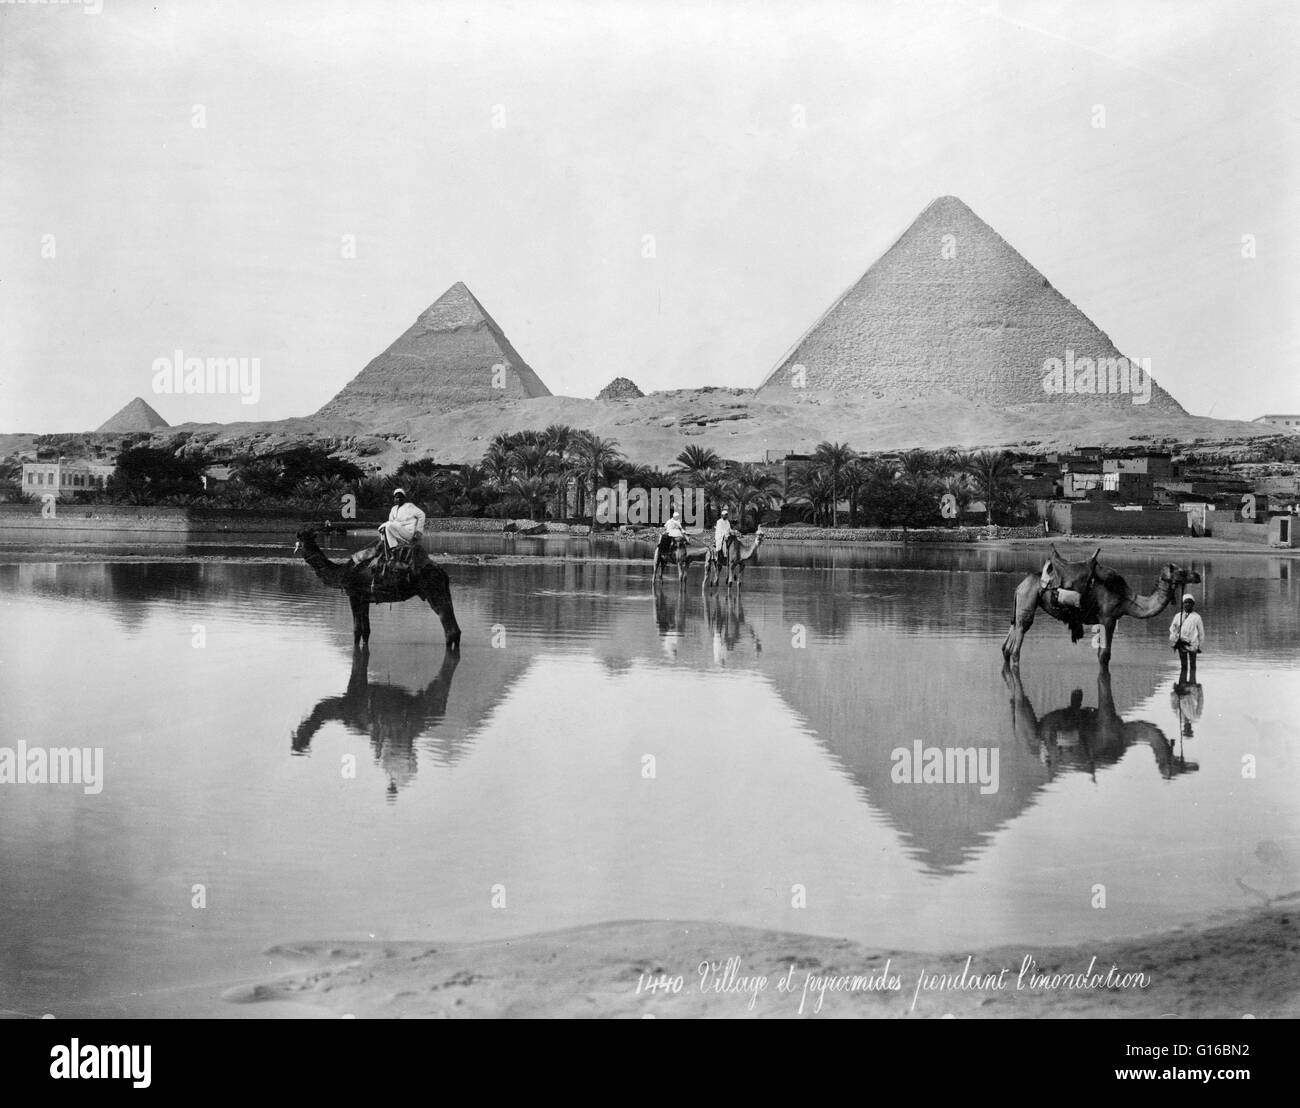 Photograph great pyramids at giza Black and White Stock Photos & Images ...